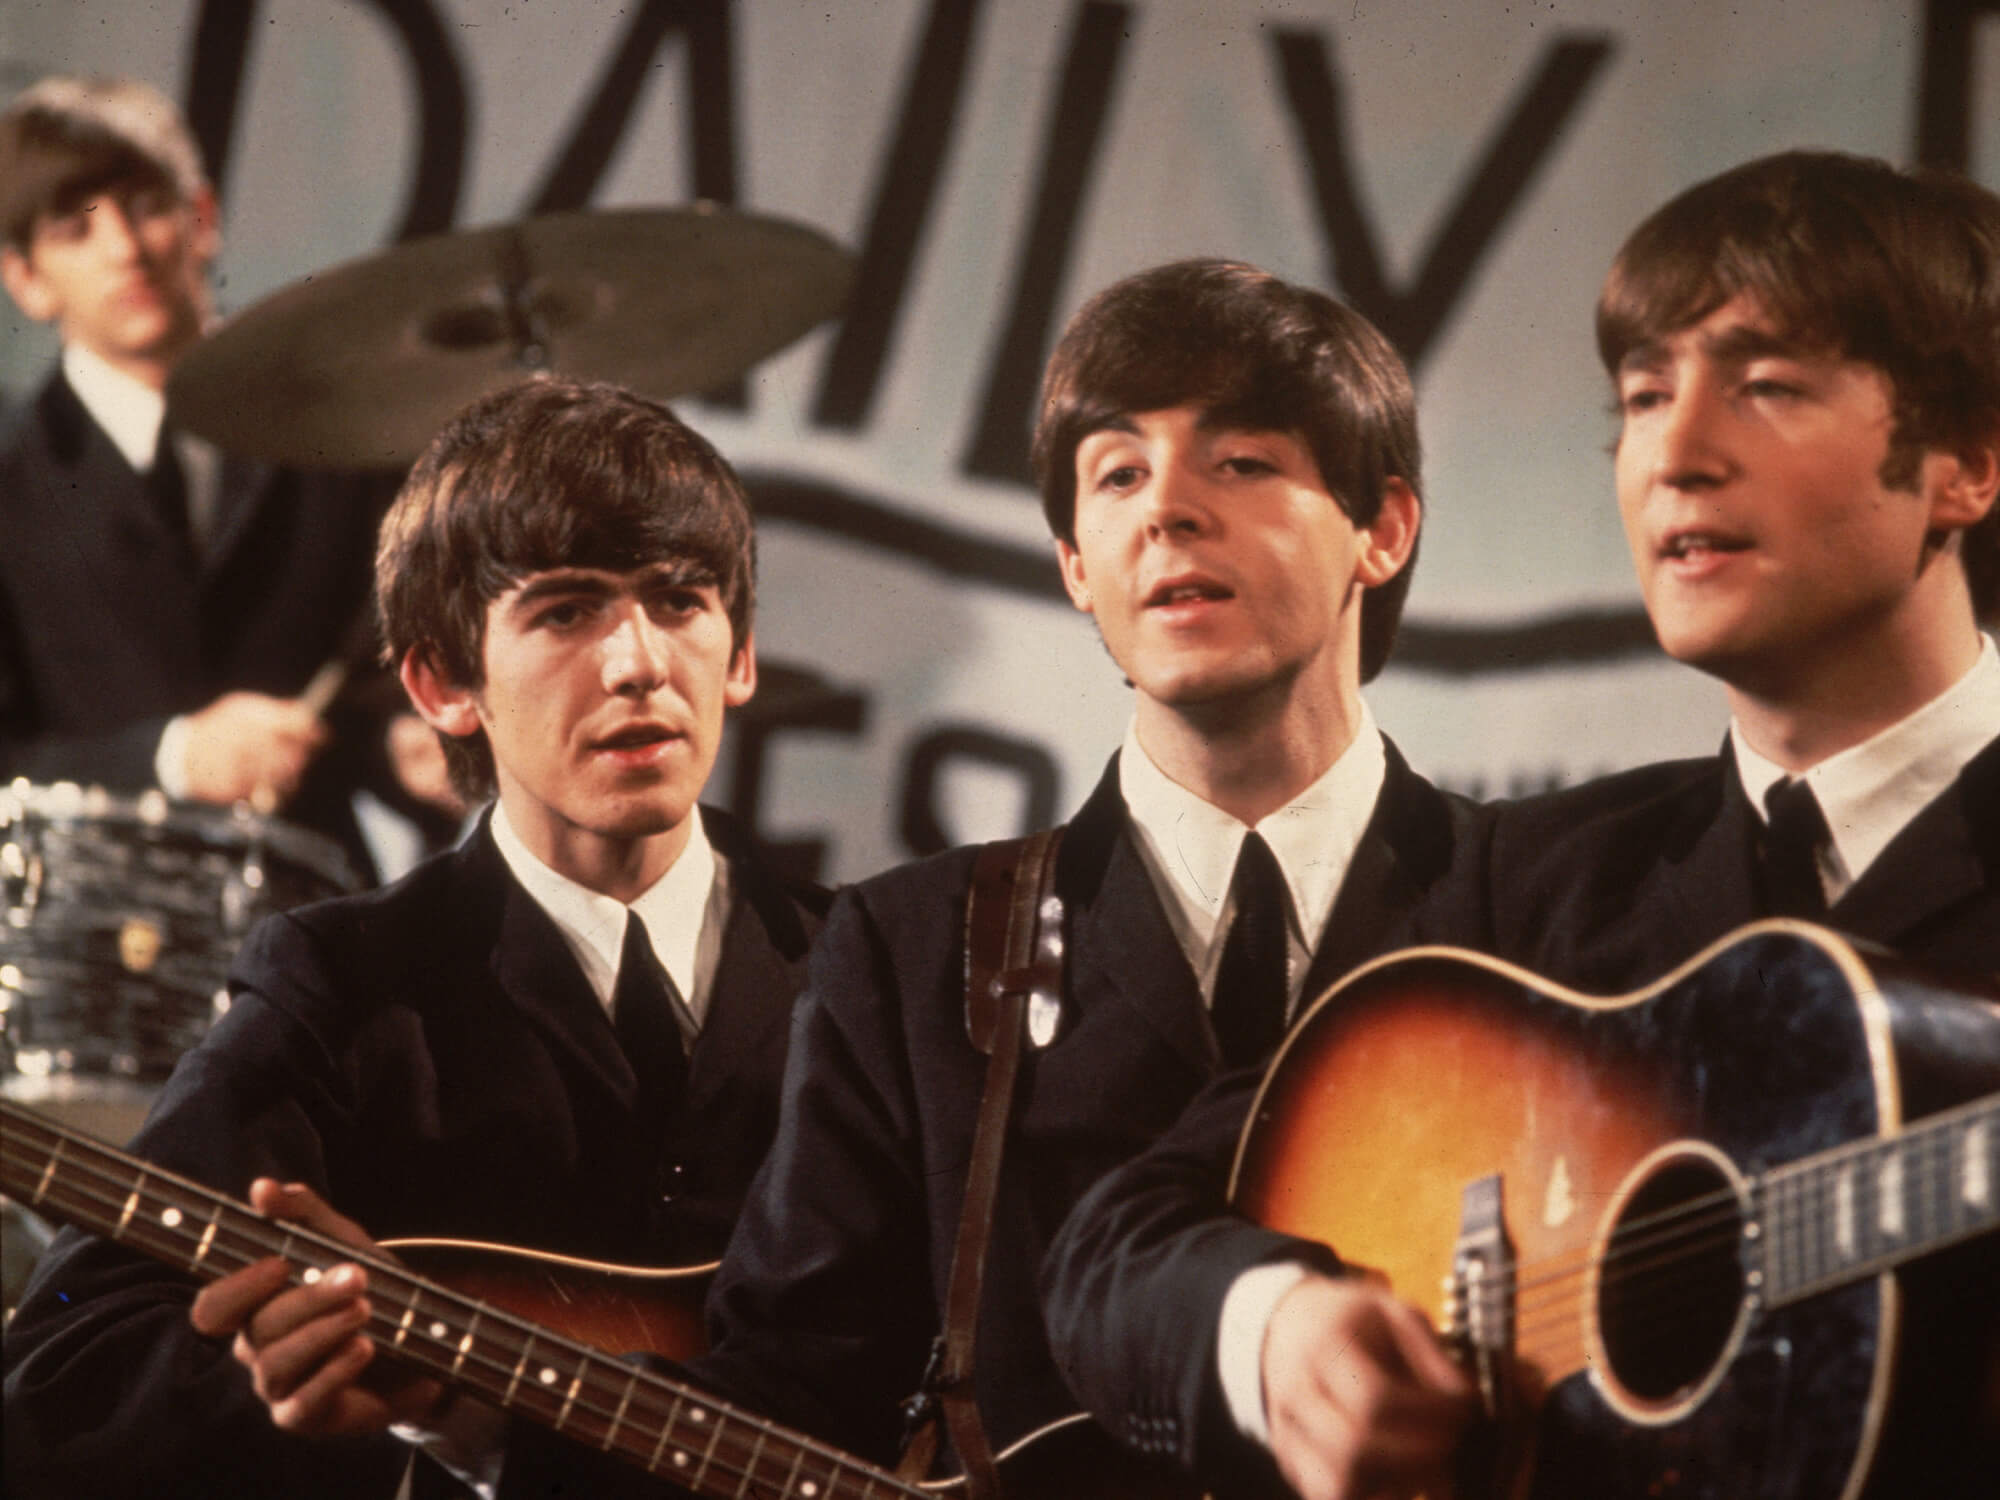 The Beatles. Ringo Starr can be seen behind the drums in the background, with George Harrison, Paul McCartney and John Lennon stood together in a line.